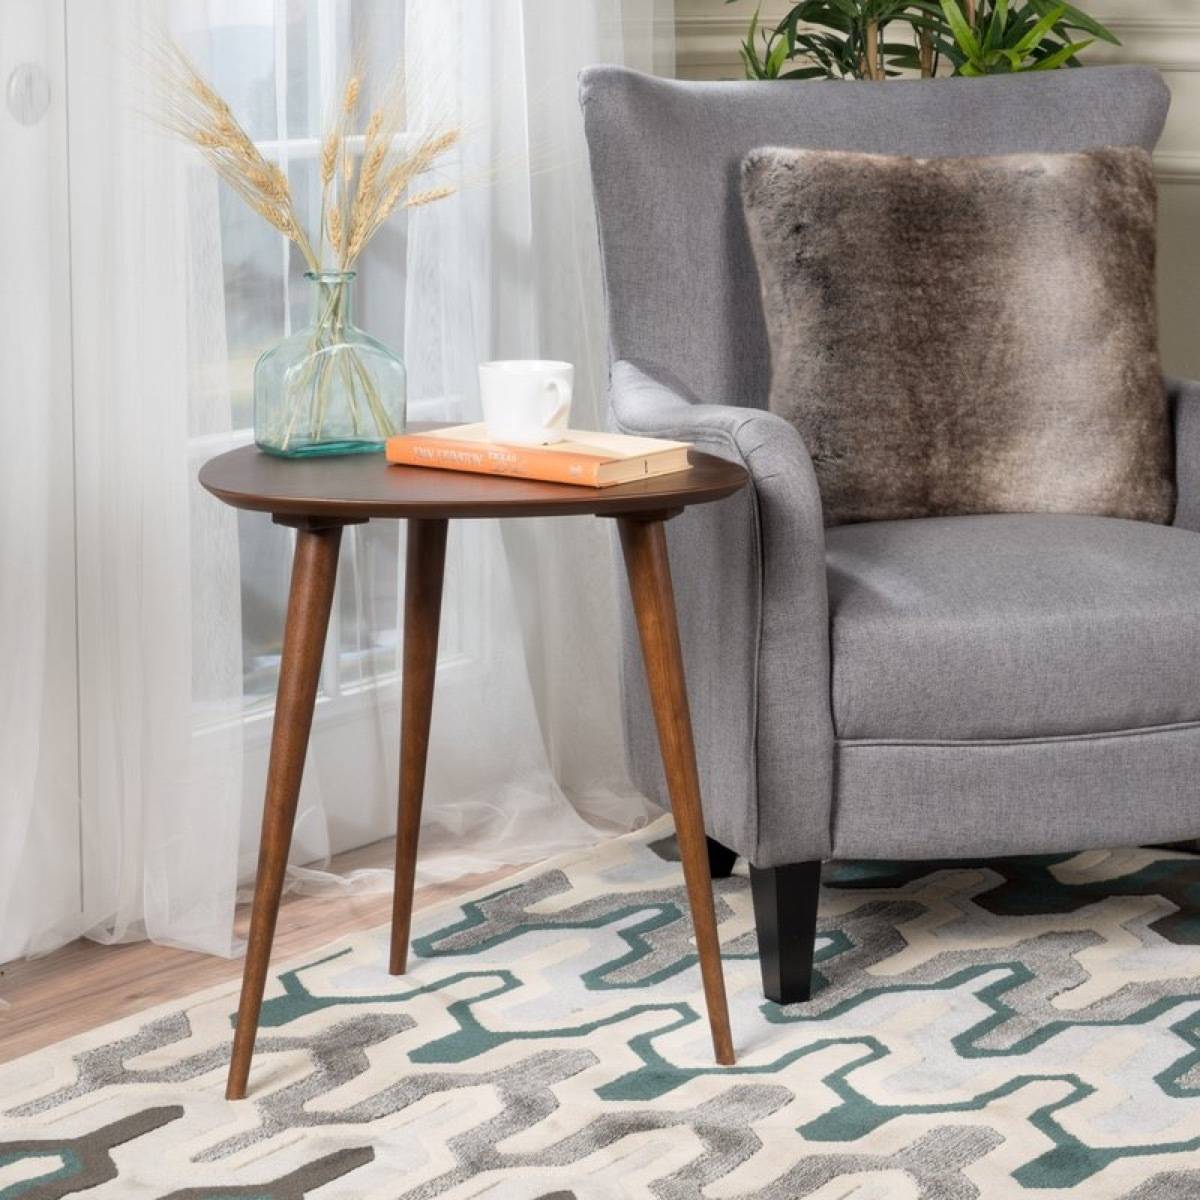 Martina end table from Wayfair